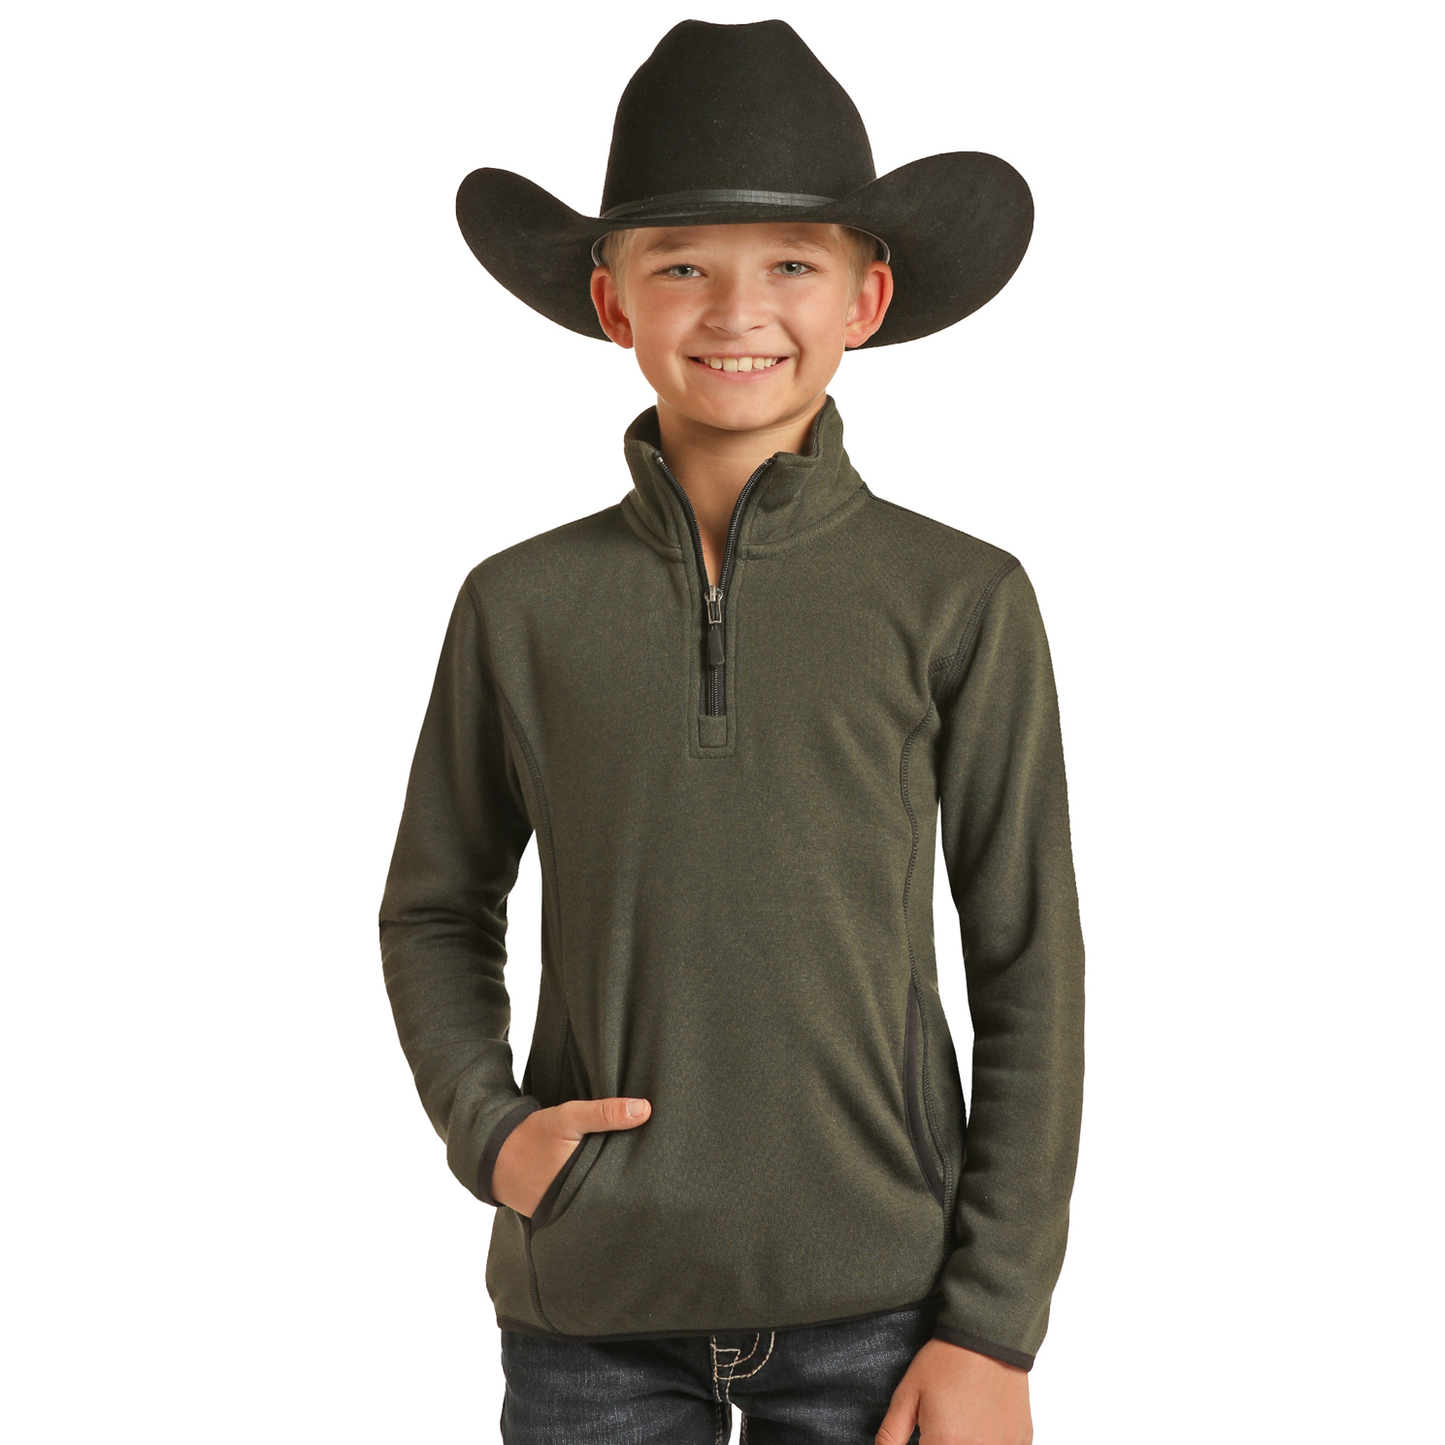 Powder River Outfitters® Youth's Green Knit Quarter Zip PRKO91RZYD-30